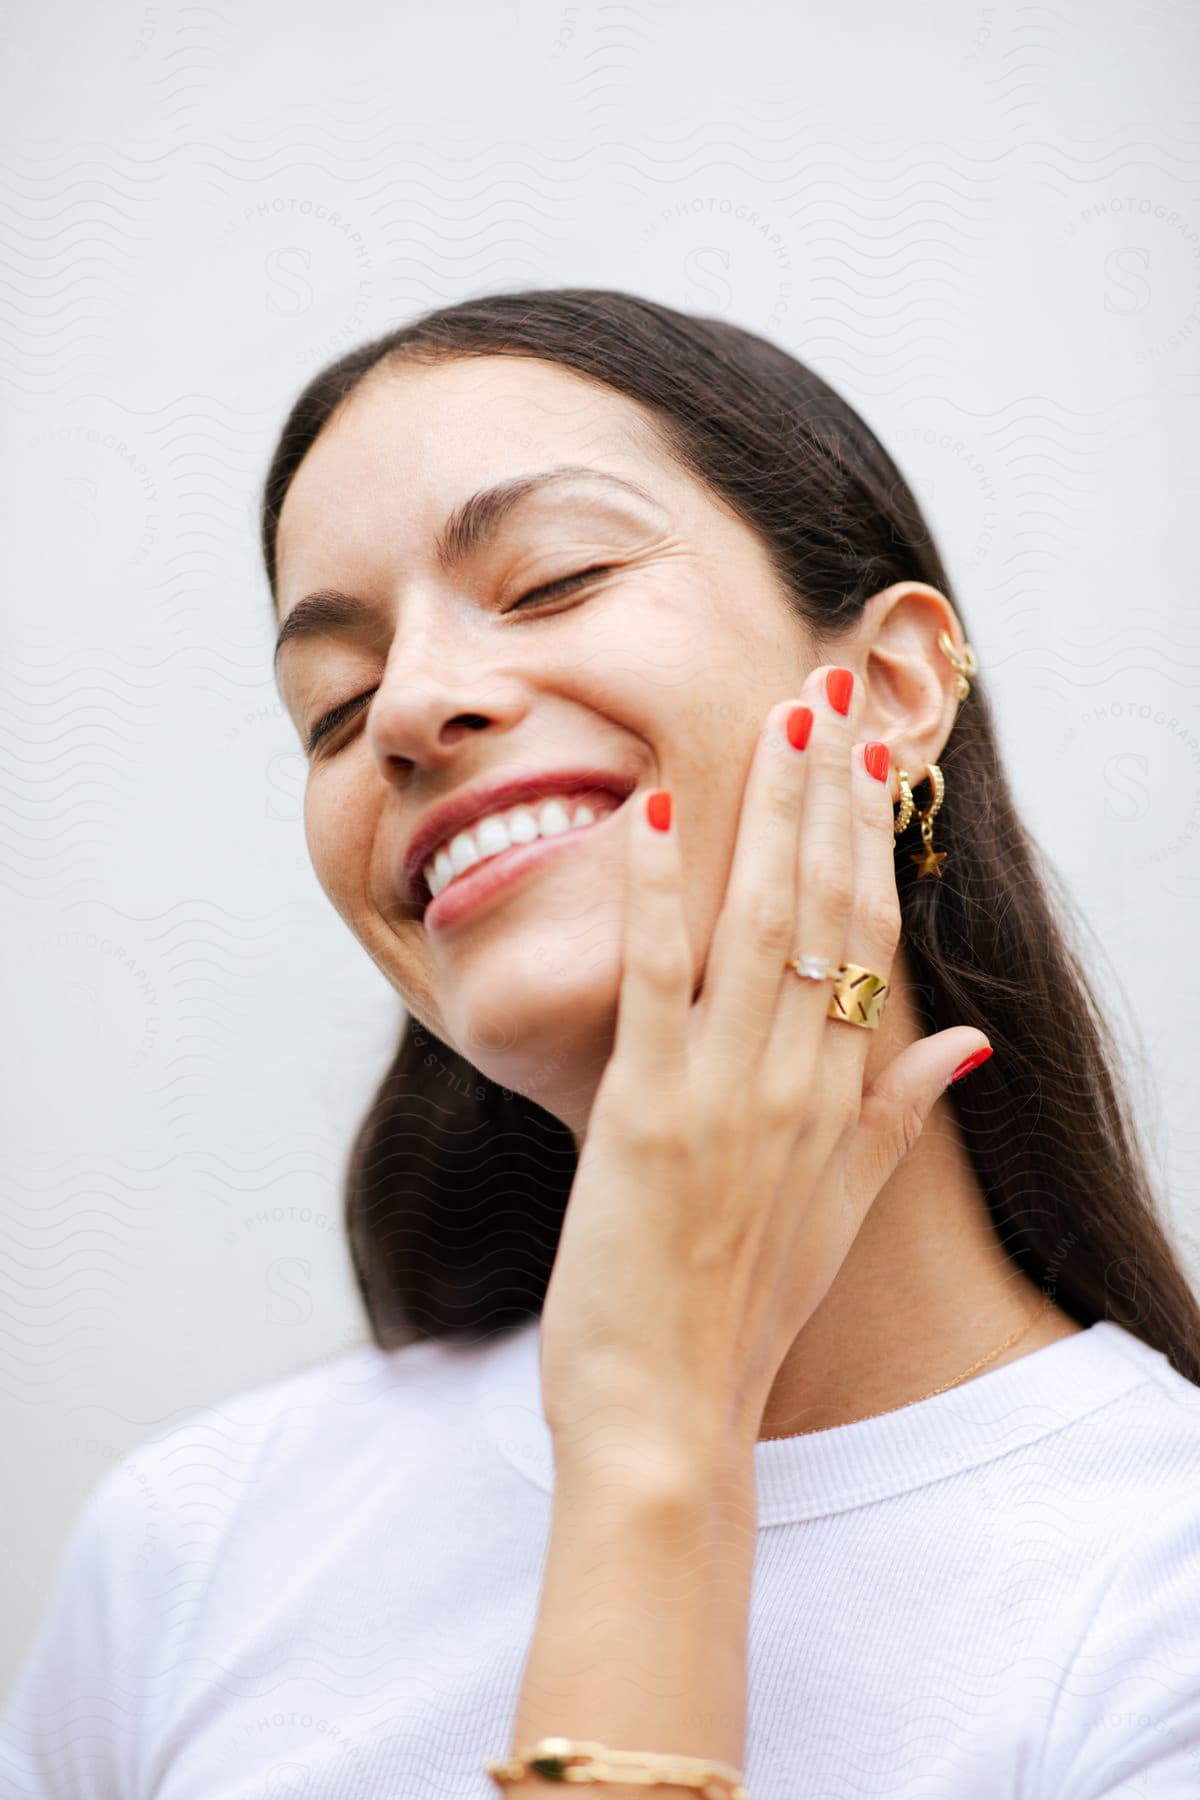 A woman smiling wide while she models rings on her fingers and earrings